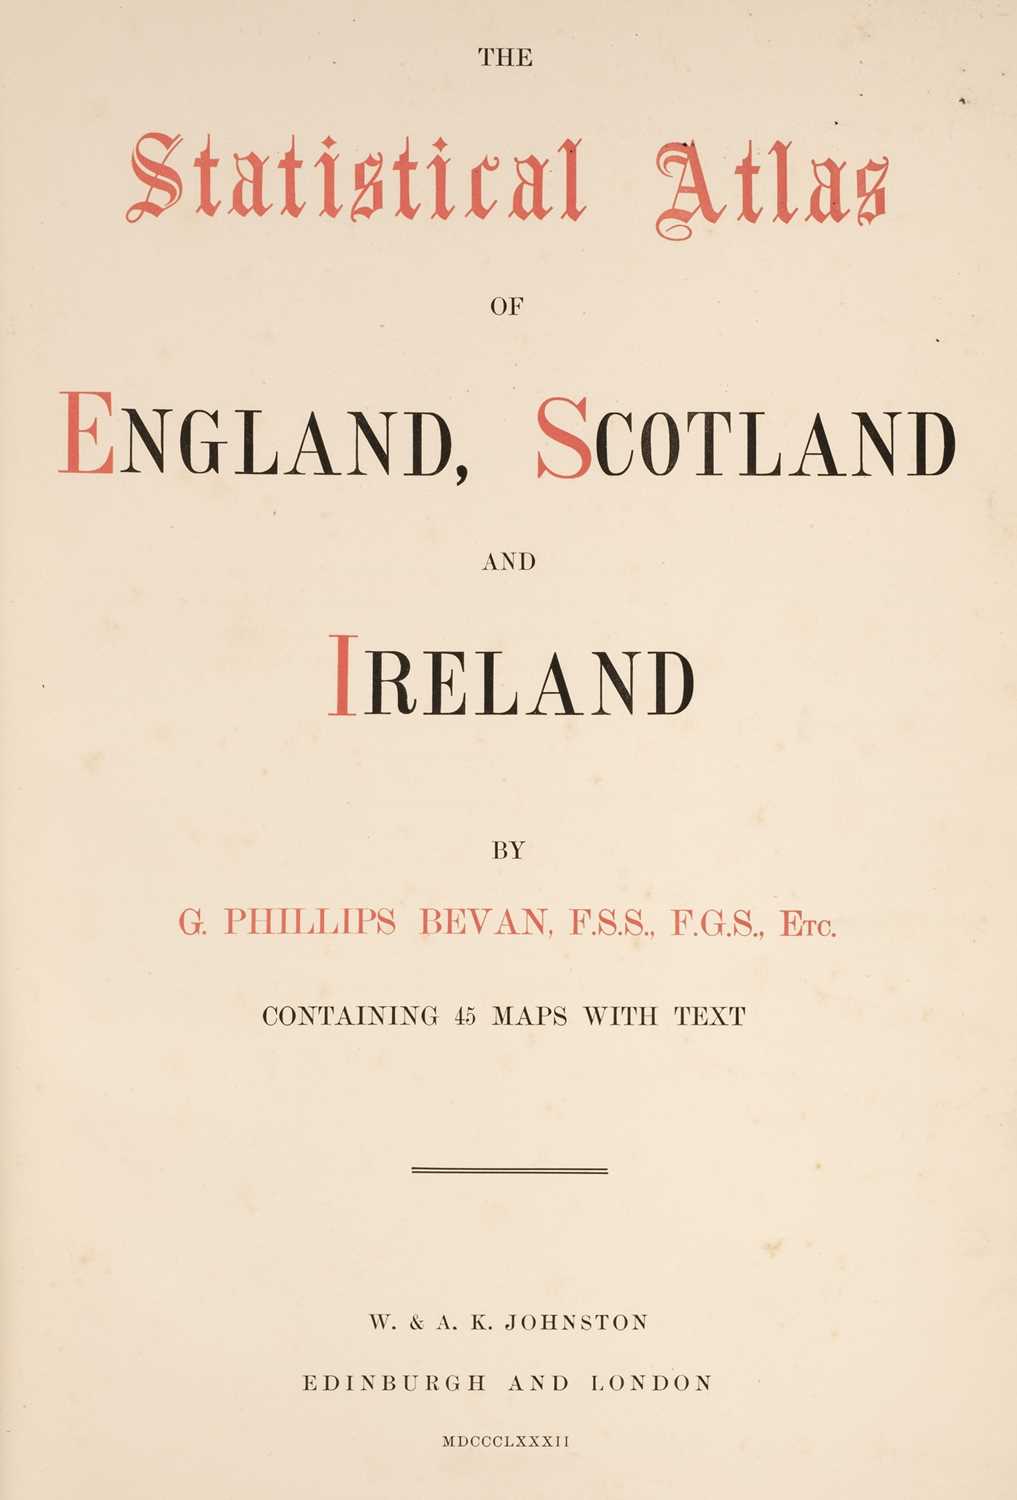 Lot 25 - Bevan (G. Phillips). The Statistical Atlas of England, Scotland and Ireland, 1882